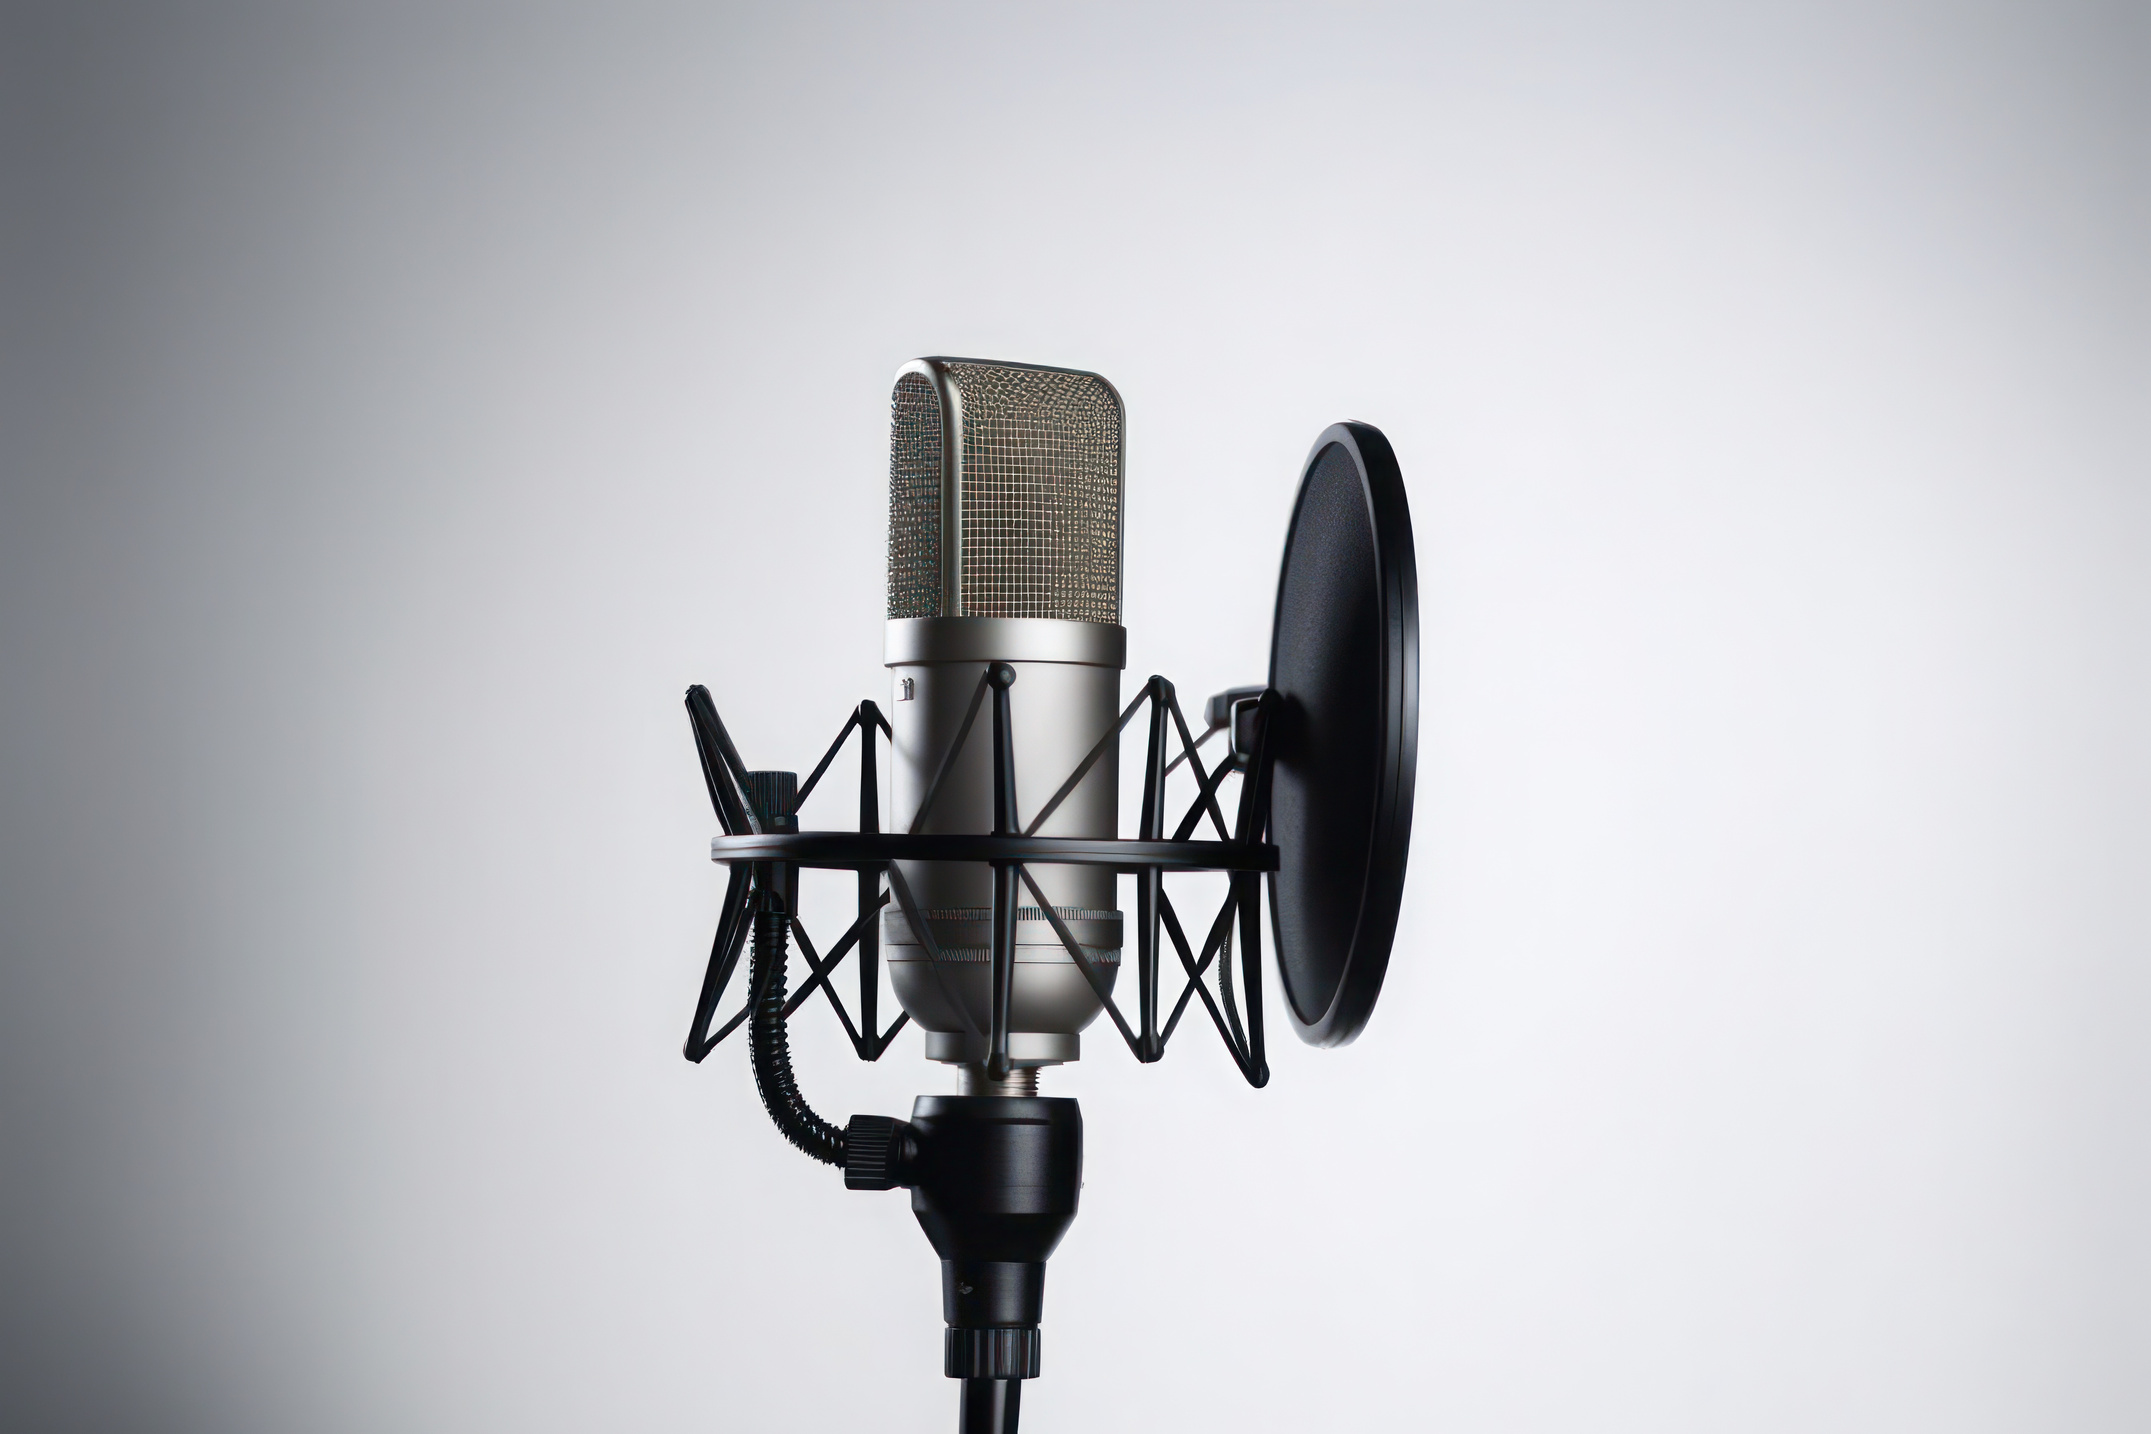 Studio Podcast Microphone on White Background